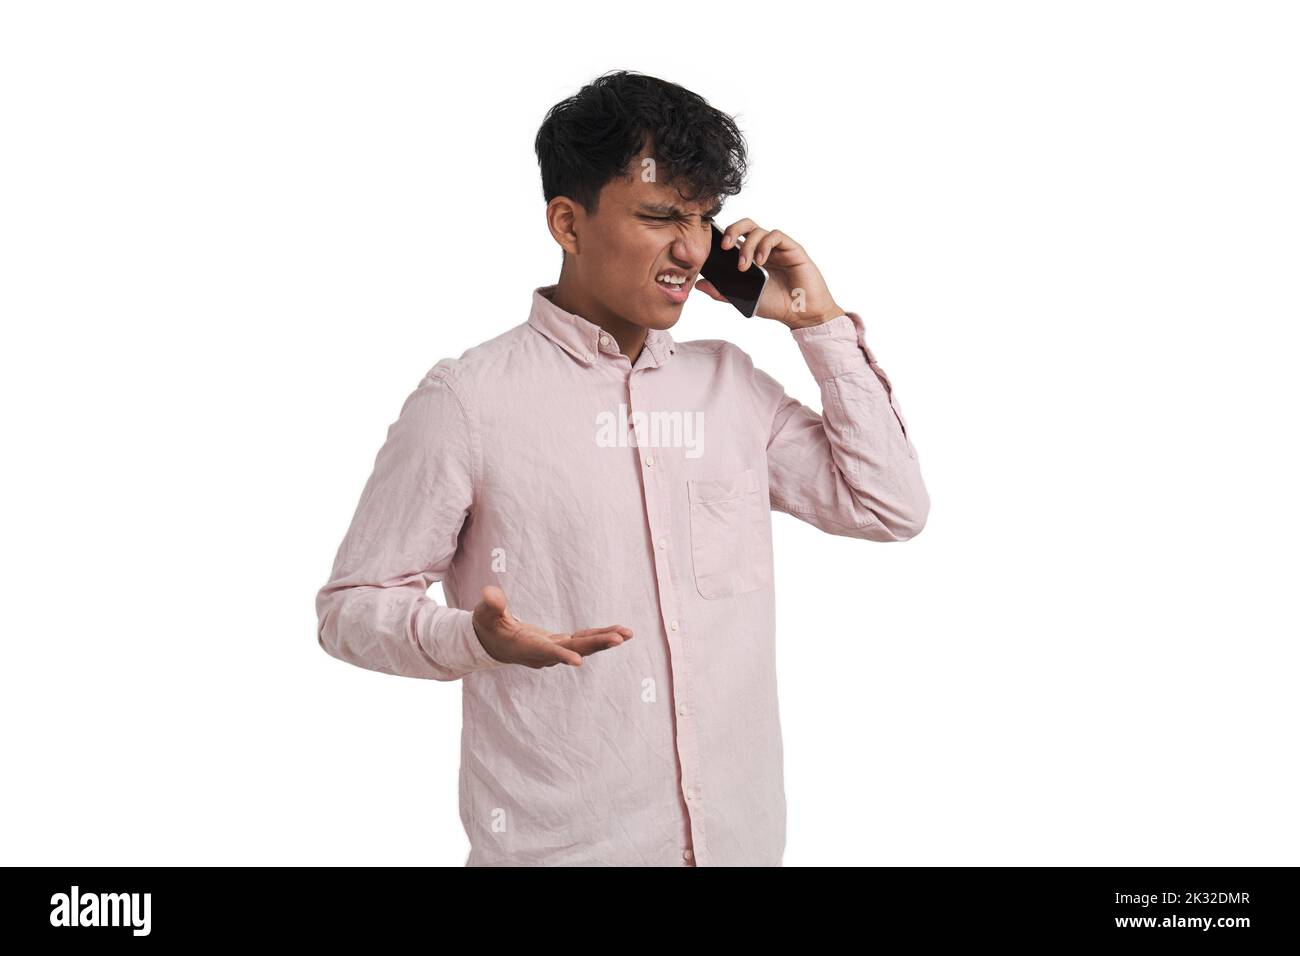 Young peruvian man angry and shrugging speaking on the phone, isolated. Stock Photo